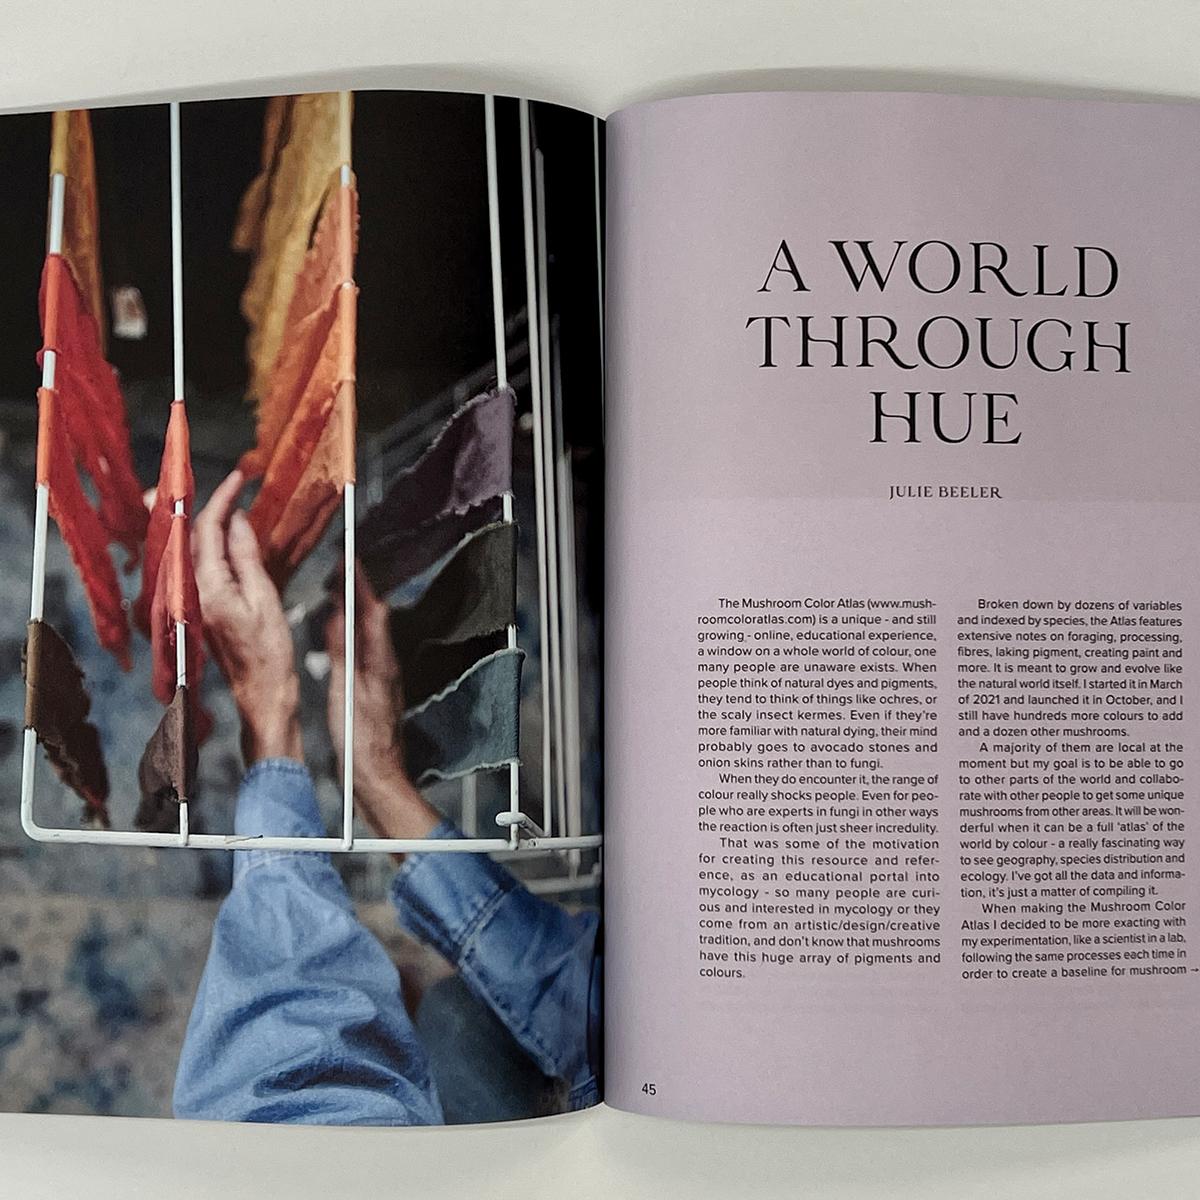 Article spread from &lsquo;A World Through Hue&rsquo; featured in THE MUSHROOM.